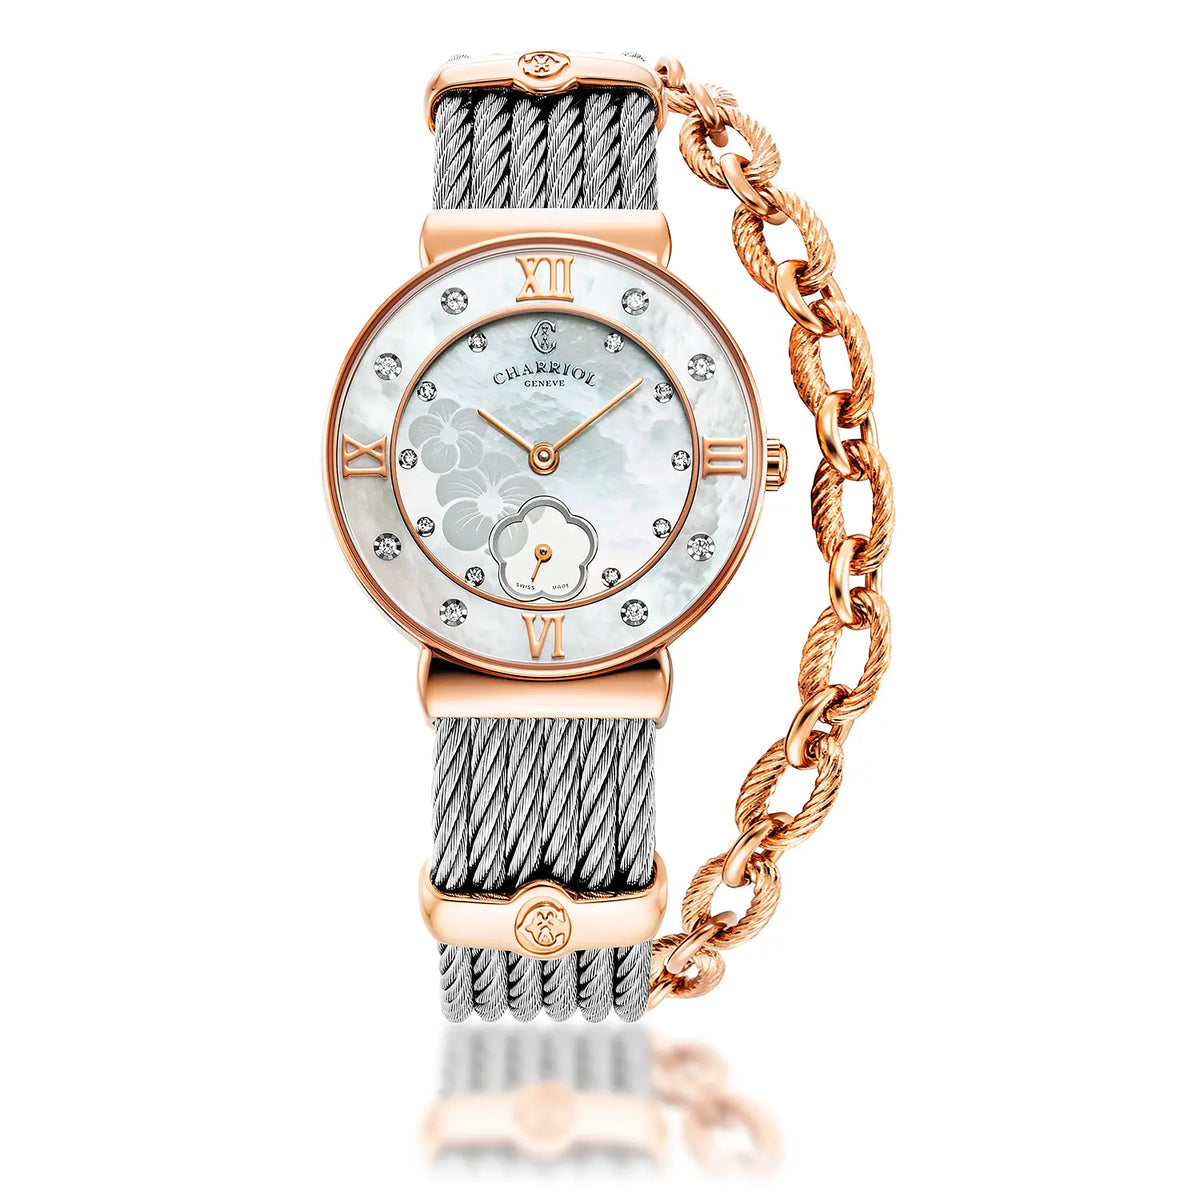 ST TROPEZ ICON, 30MM, QUARTZ CALIBRE, MOTHER-OF-PEARL HIBISCUS DIAL, MOTHER-OF-PEARL WITH 8 DIAMONDS BEZEL, STEEL CABLE BRACELET